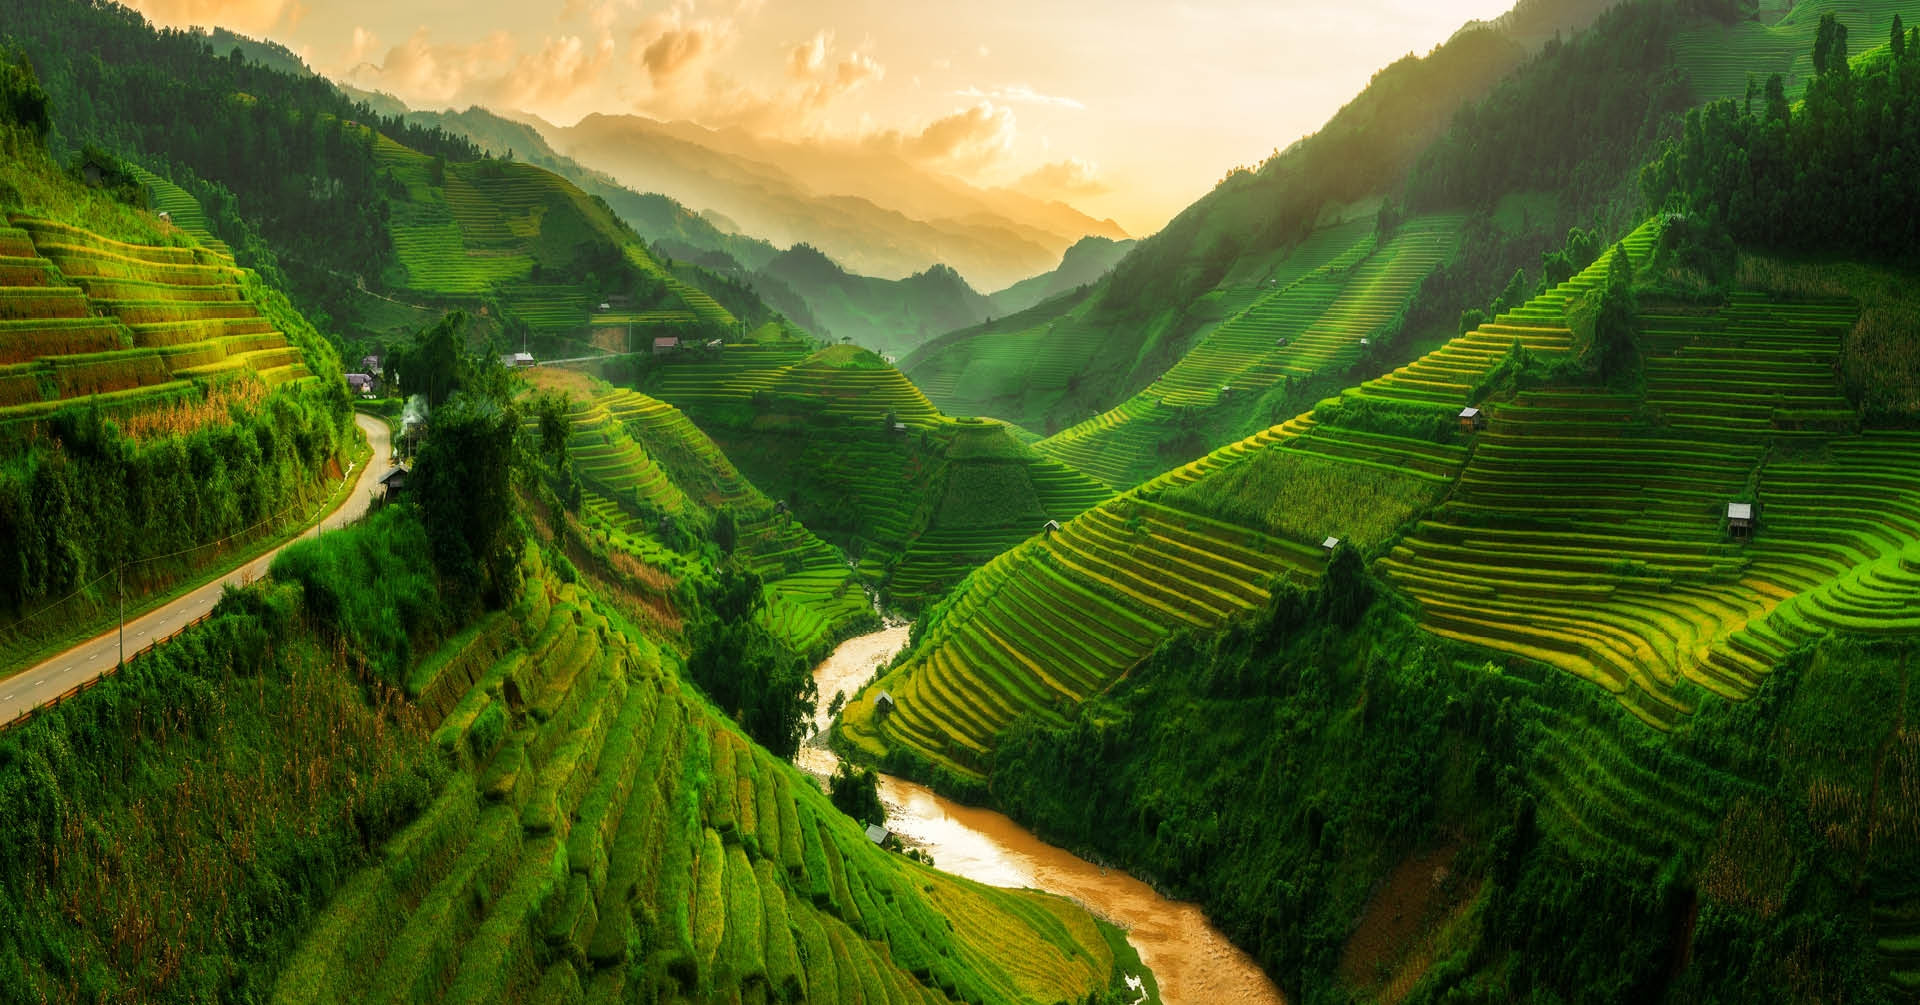 Take a break from everyday life and escape to the breathtaking mountain views of Sapa - vietnam best sights